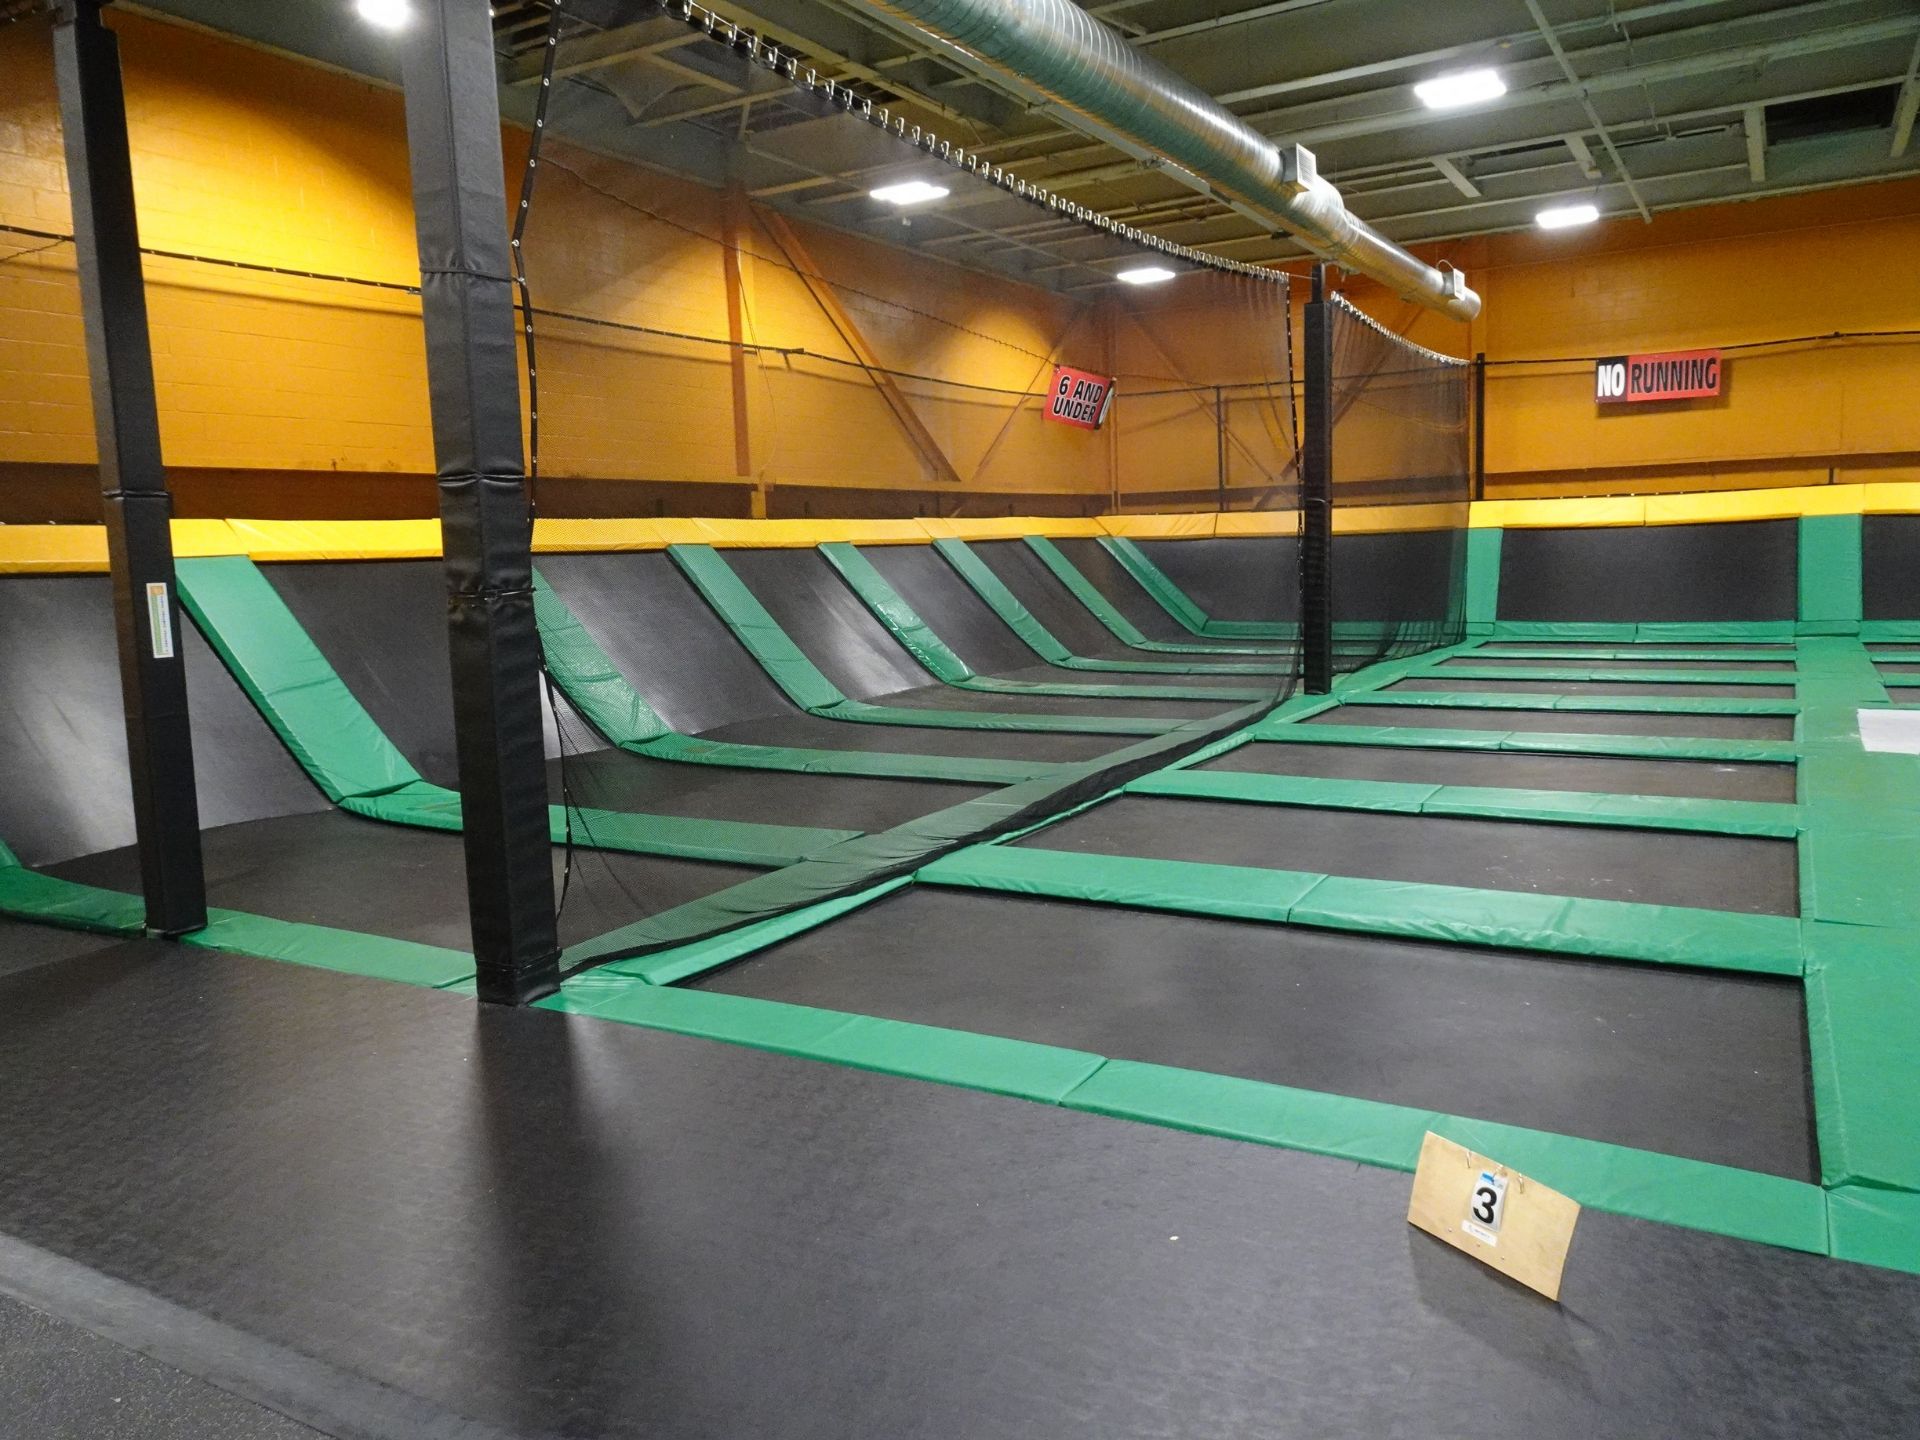 Free for All Section consisting of" (27) 7' x 12' Long Mats, (14) 7' x 7' Long Incline Mats complete - Image 2 of 8